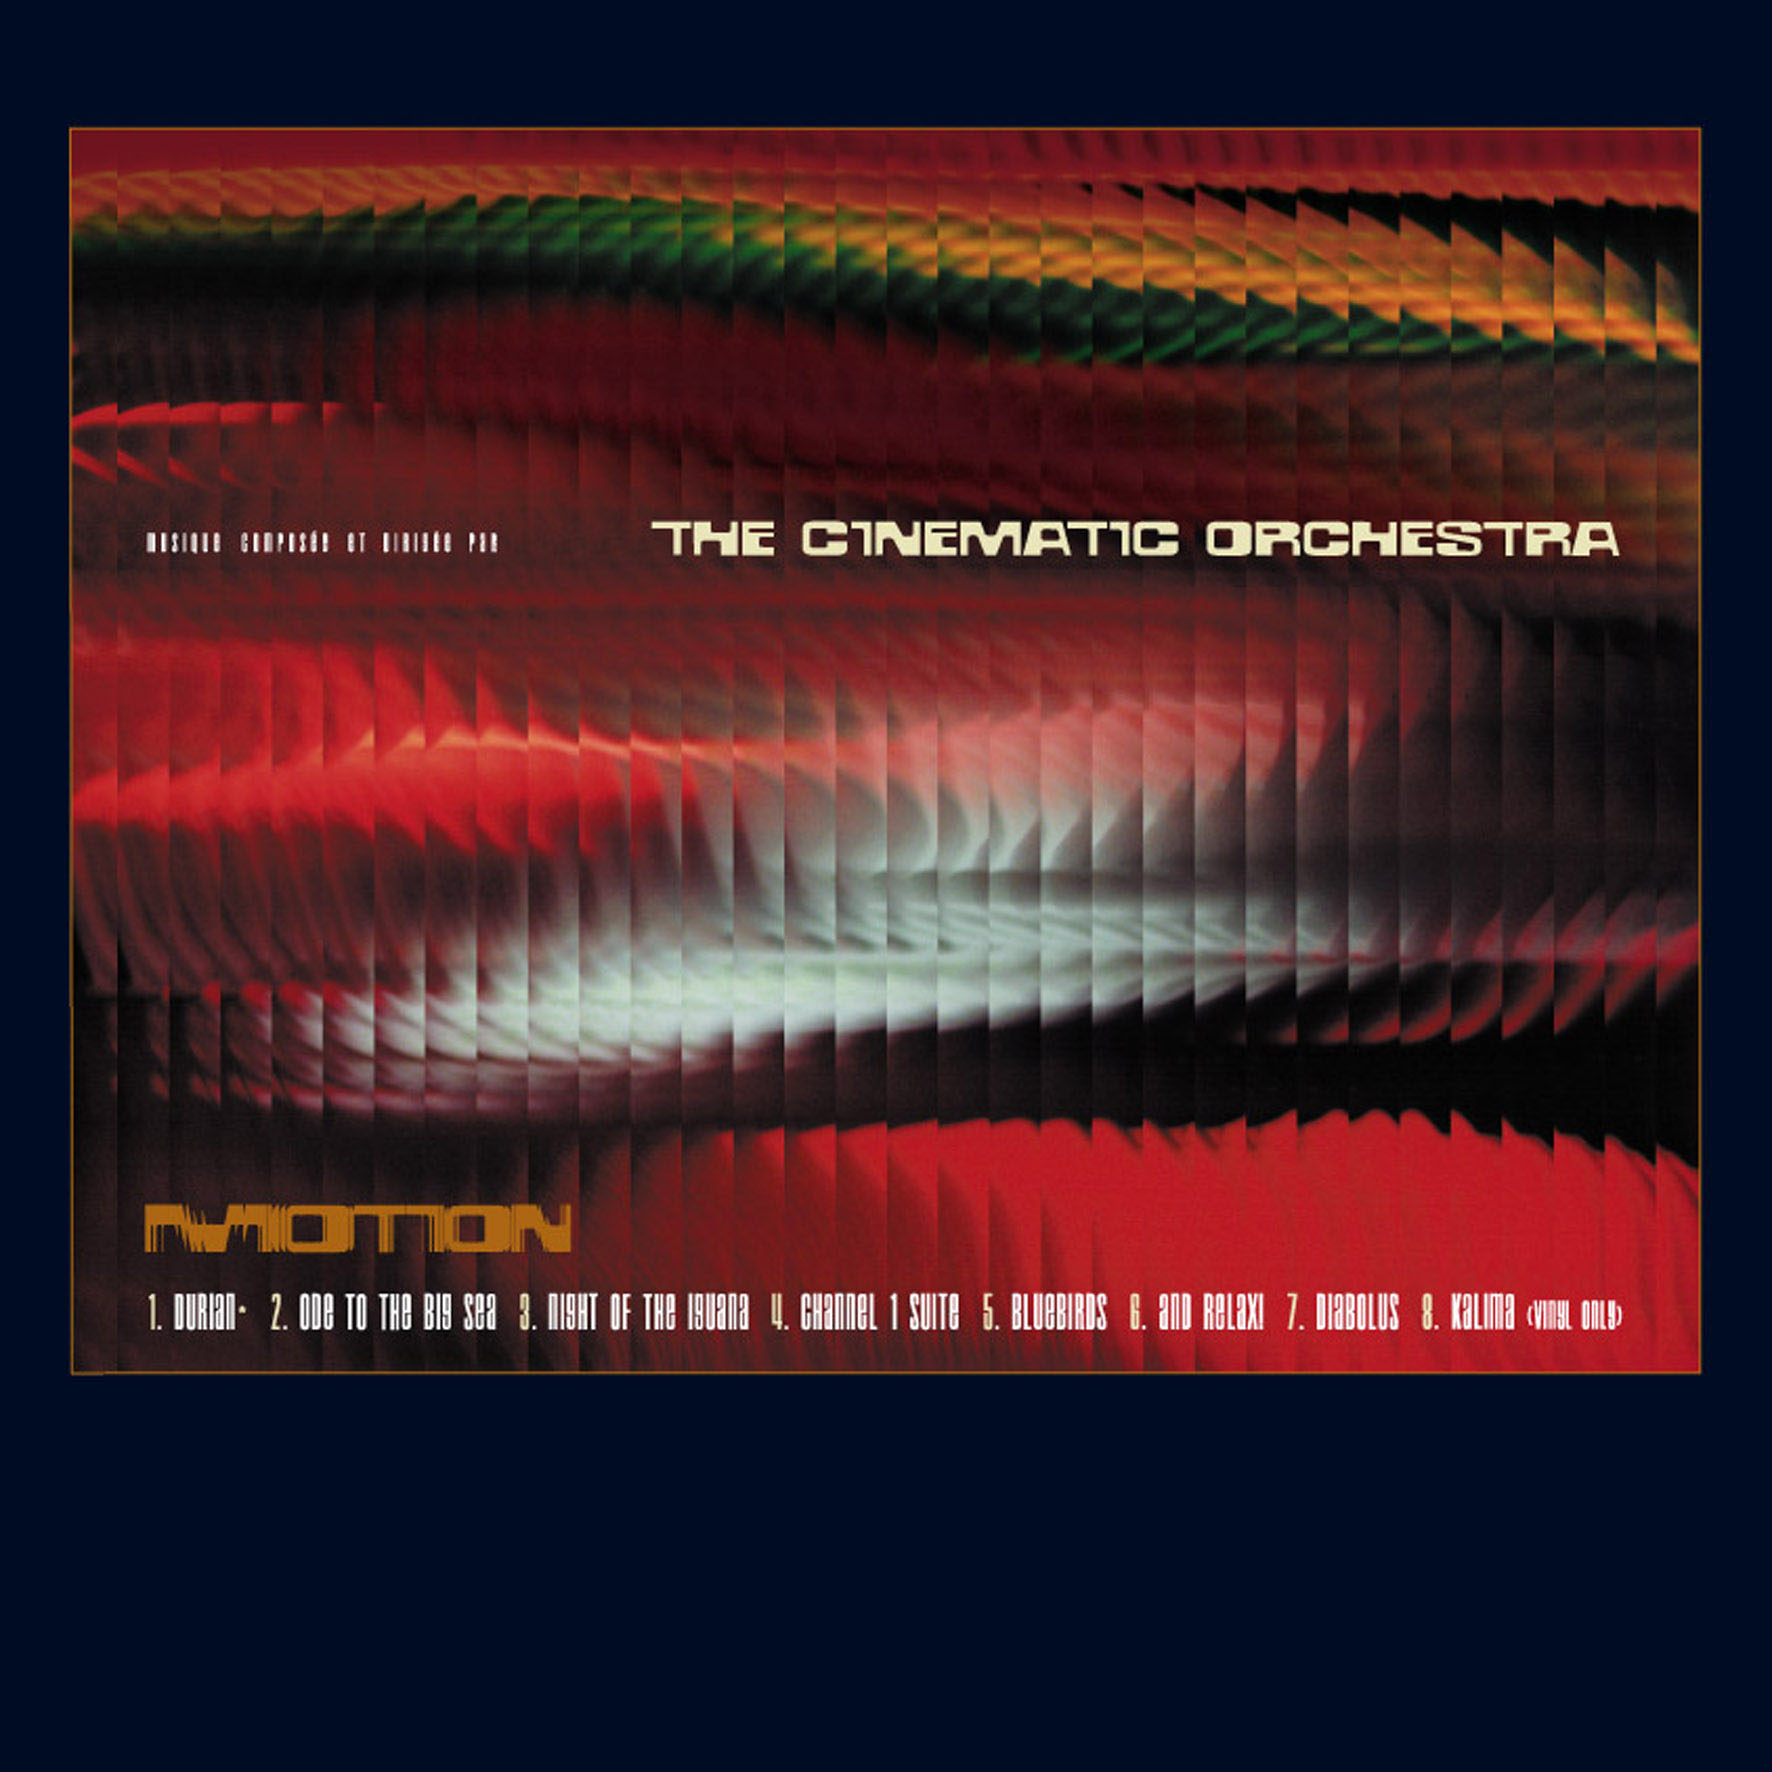 The Cinematic Orchestra - Motion - CD